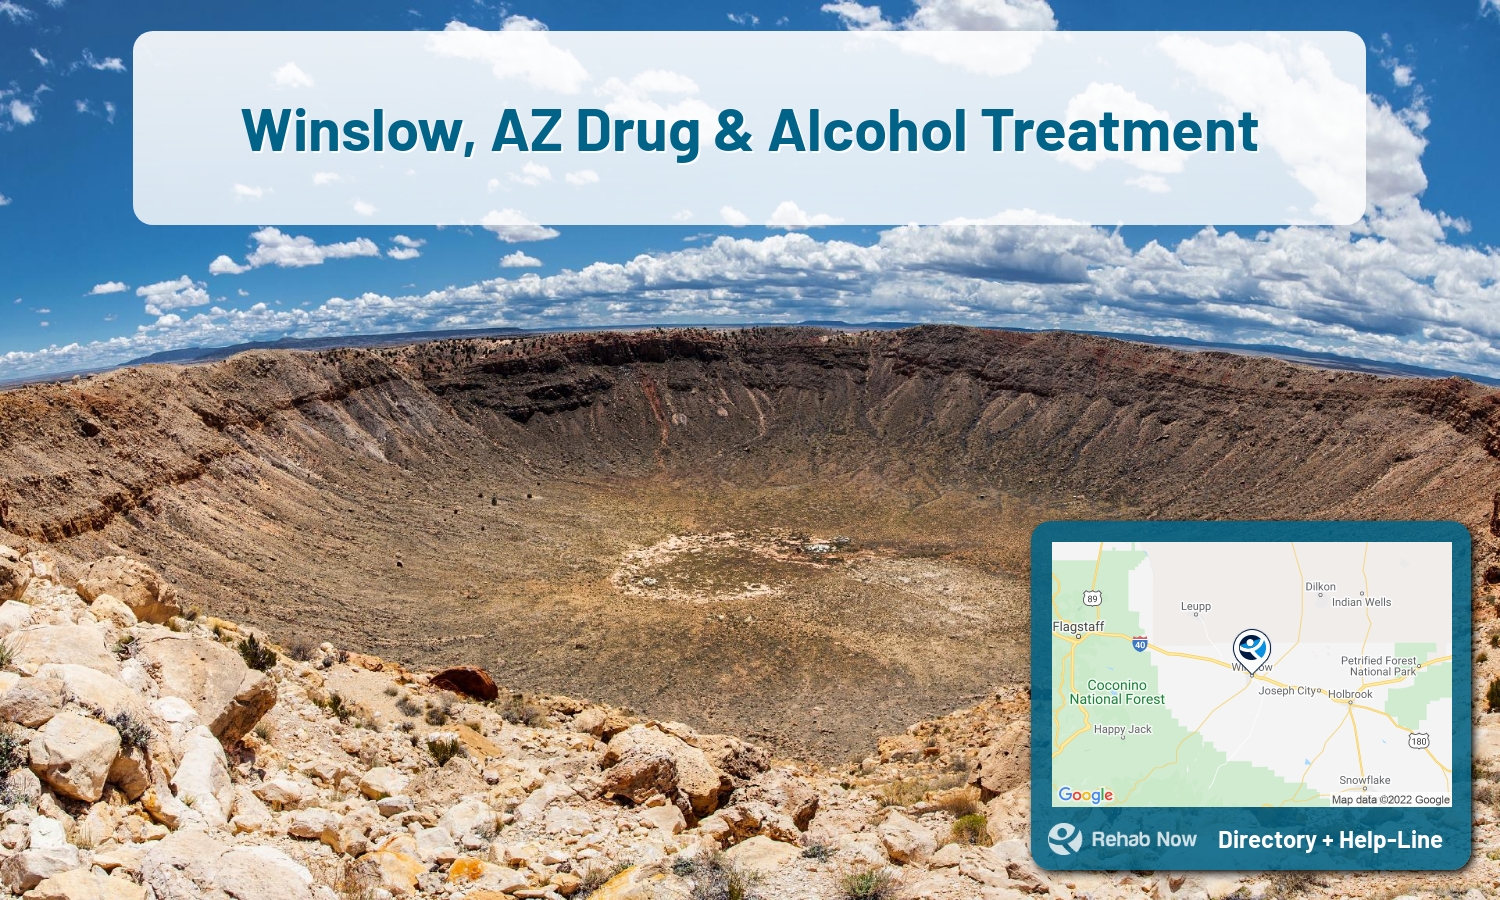 Ready to pick a rehab center in Winslow? Get off alcohol, opiates, and other drugs, by selecting top drug rehab centers in Arizona